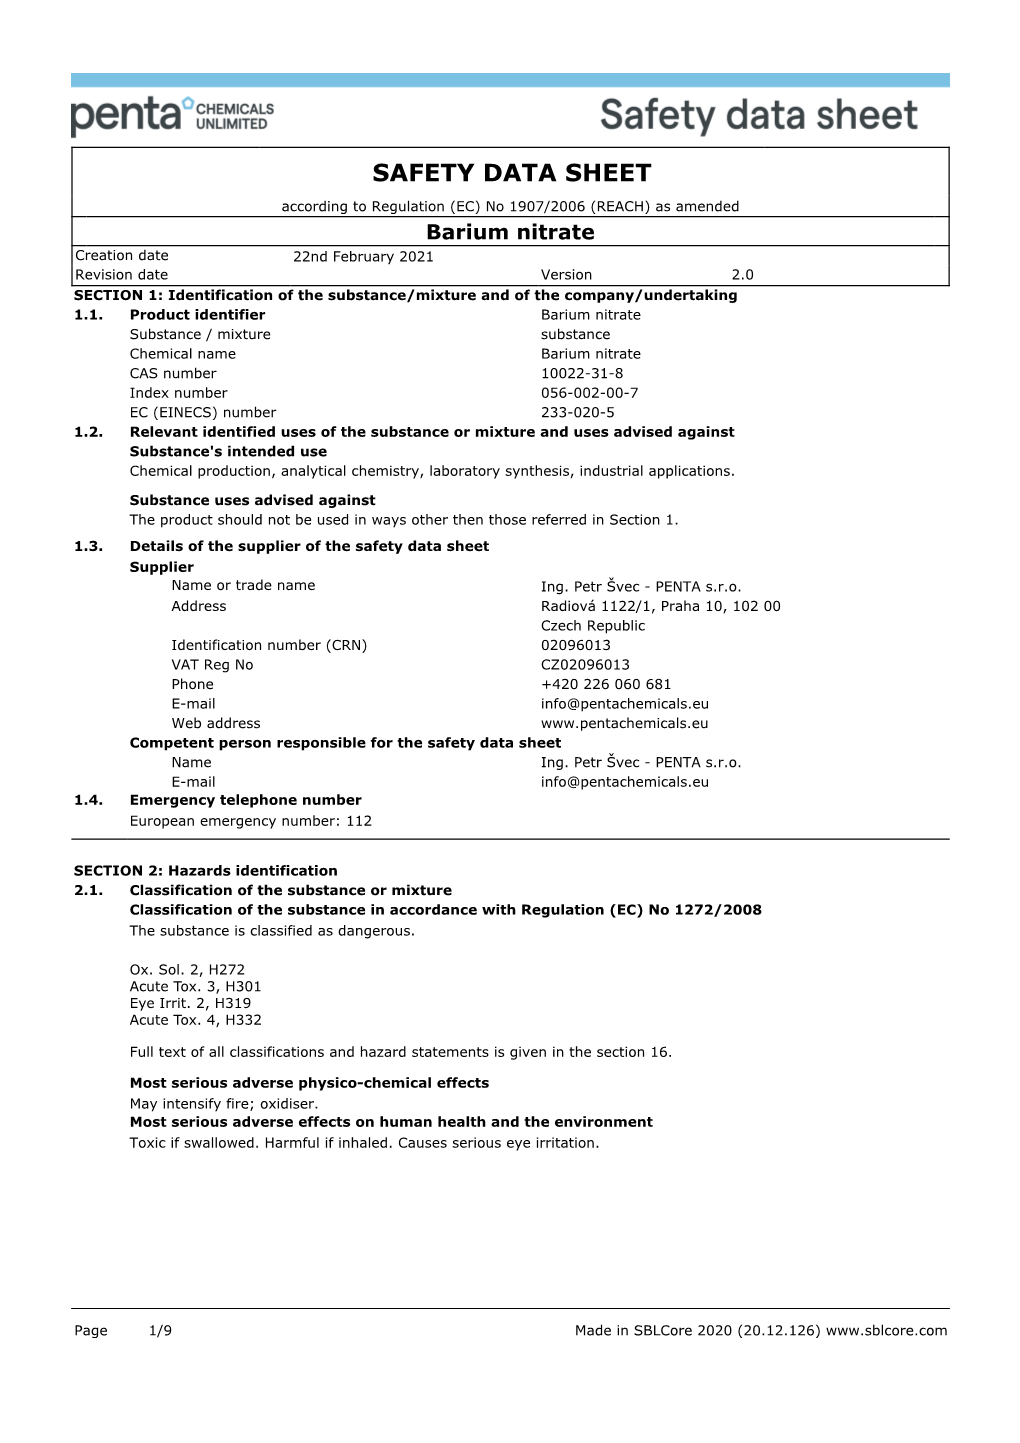 Barium Nitrate Creation Date 22Nd February 2021 Revision Date Version 2.0 SECTION 1: Identification of the Substance/Mixture and of the Company/Undertaking 1.1